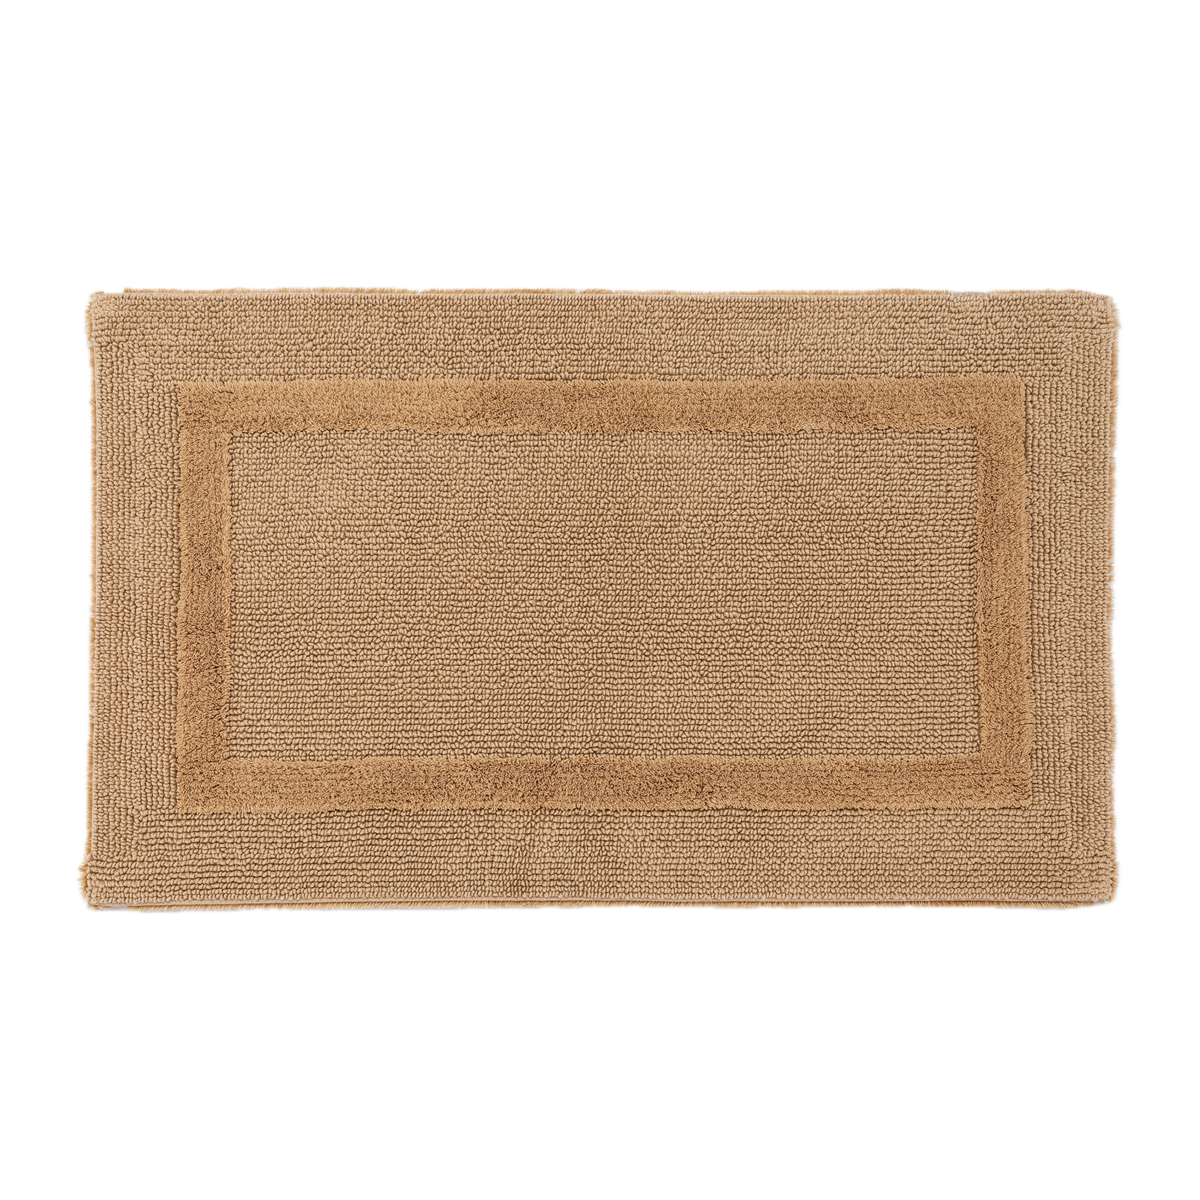 Abyss Habidecor Reversible Bath Rug in Croissant Color